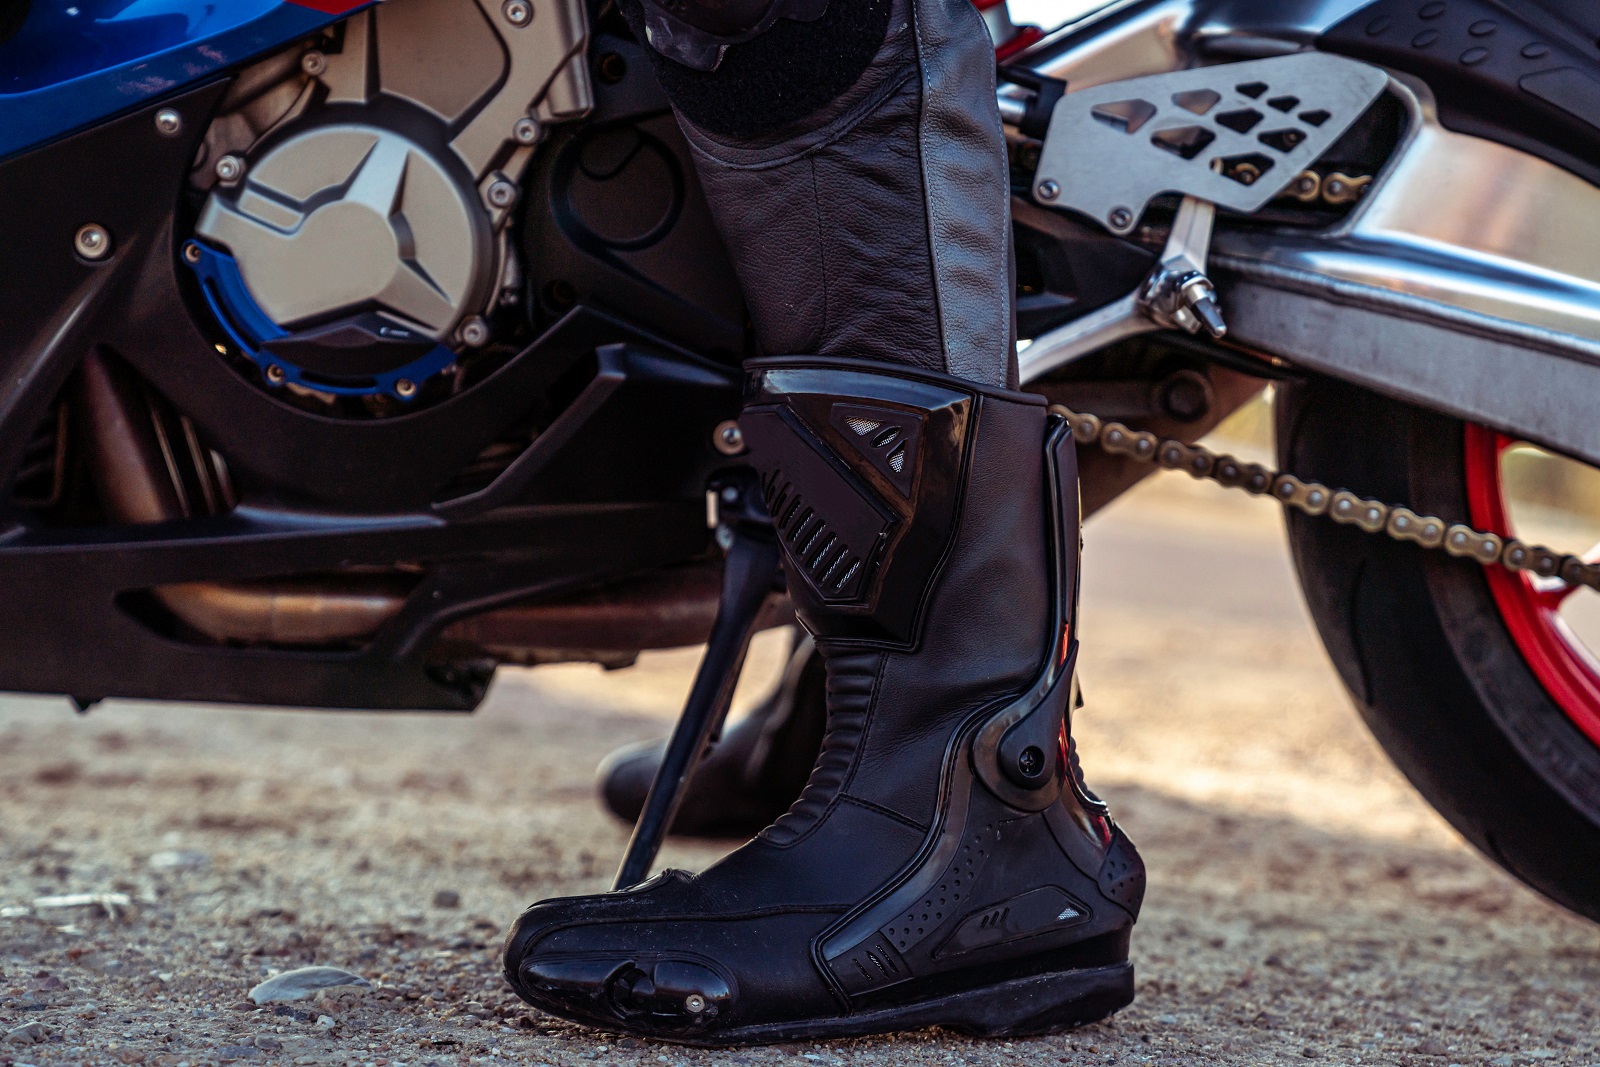 <p class="wp-caption-text">Image Credit: Shutterstock / miguel curiel mena</p>  <p><span>Proper motorcycle boots protect your feet and ankles. They should be sturdy, cover your ankles, and have non-slip soles for better grip on the foot pegs and ground.</span></p>